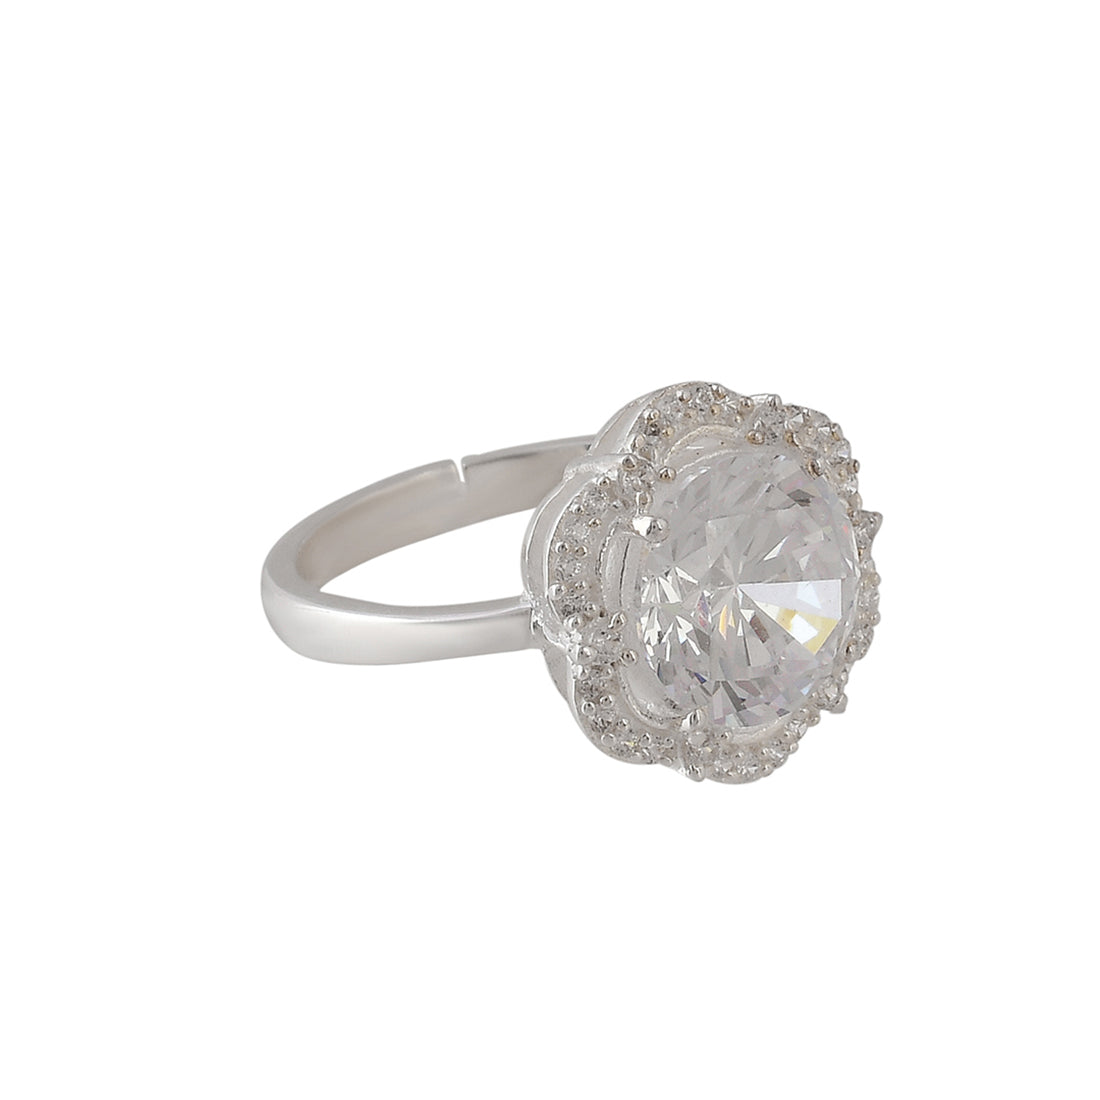 925 Sterling Silver White Round Cut CZ Ring